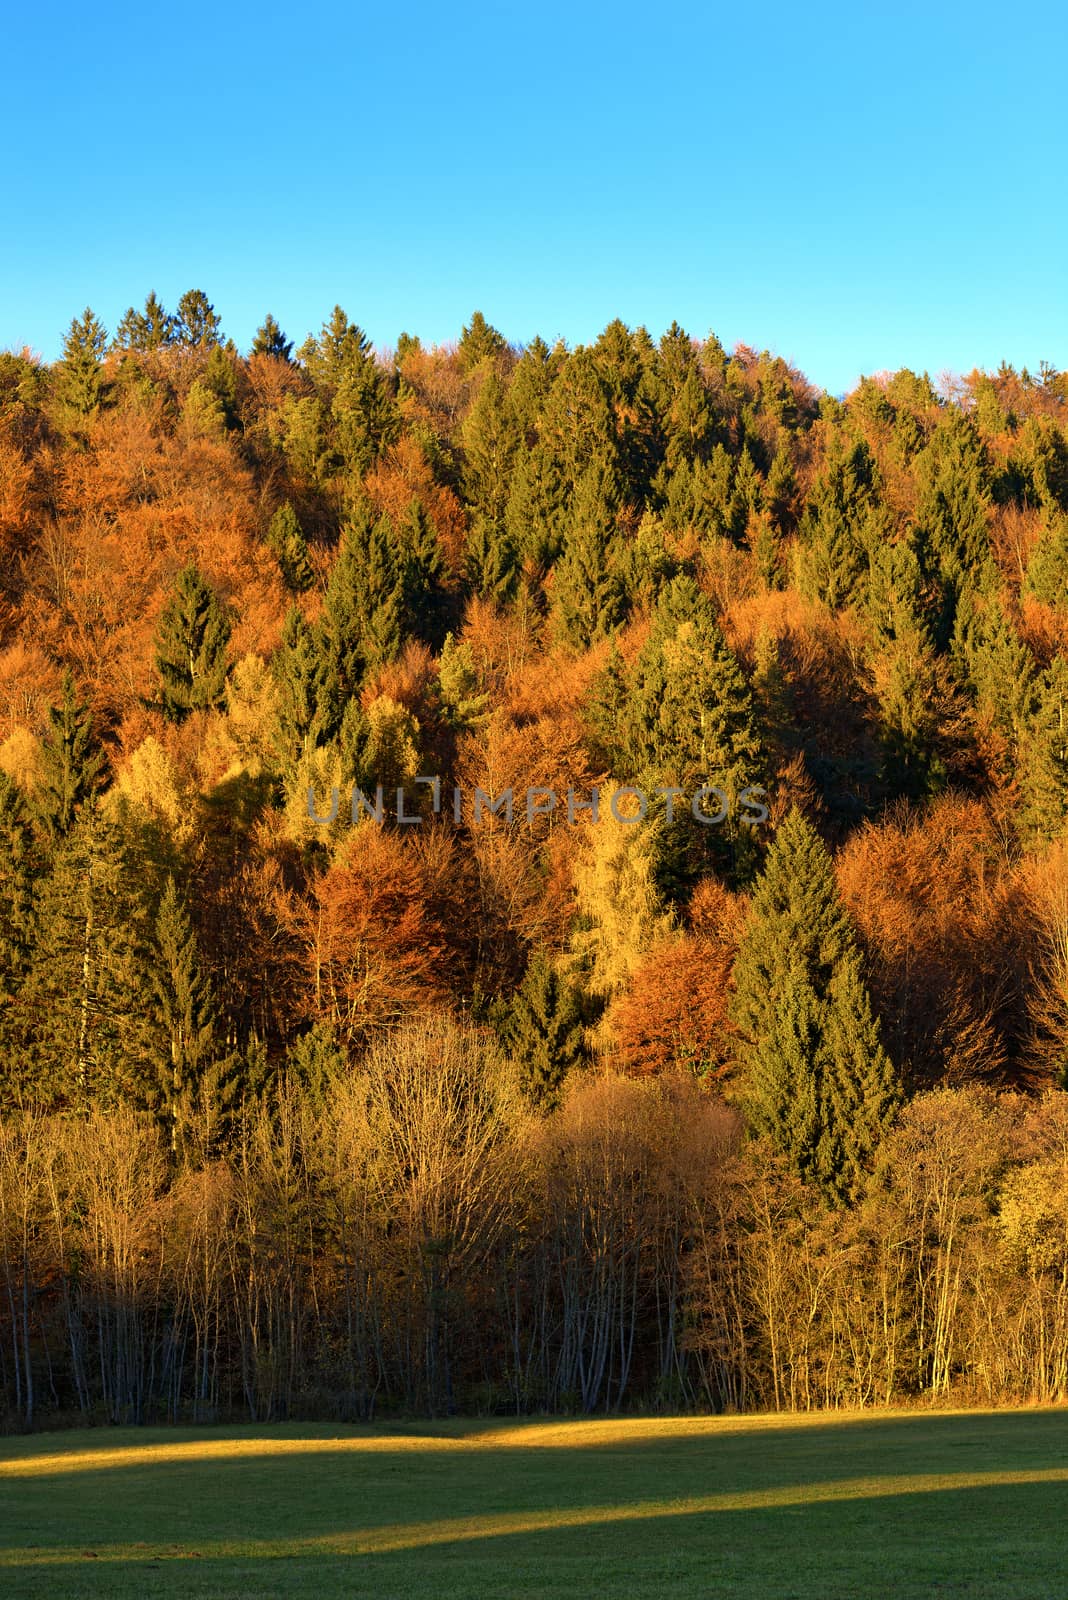 Autumnal Forest at Sunset - Trentino Italy by catalby